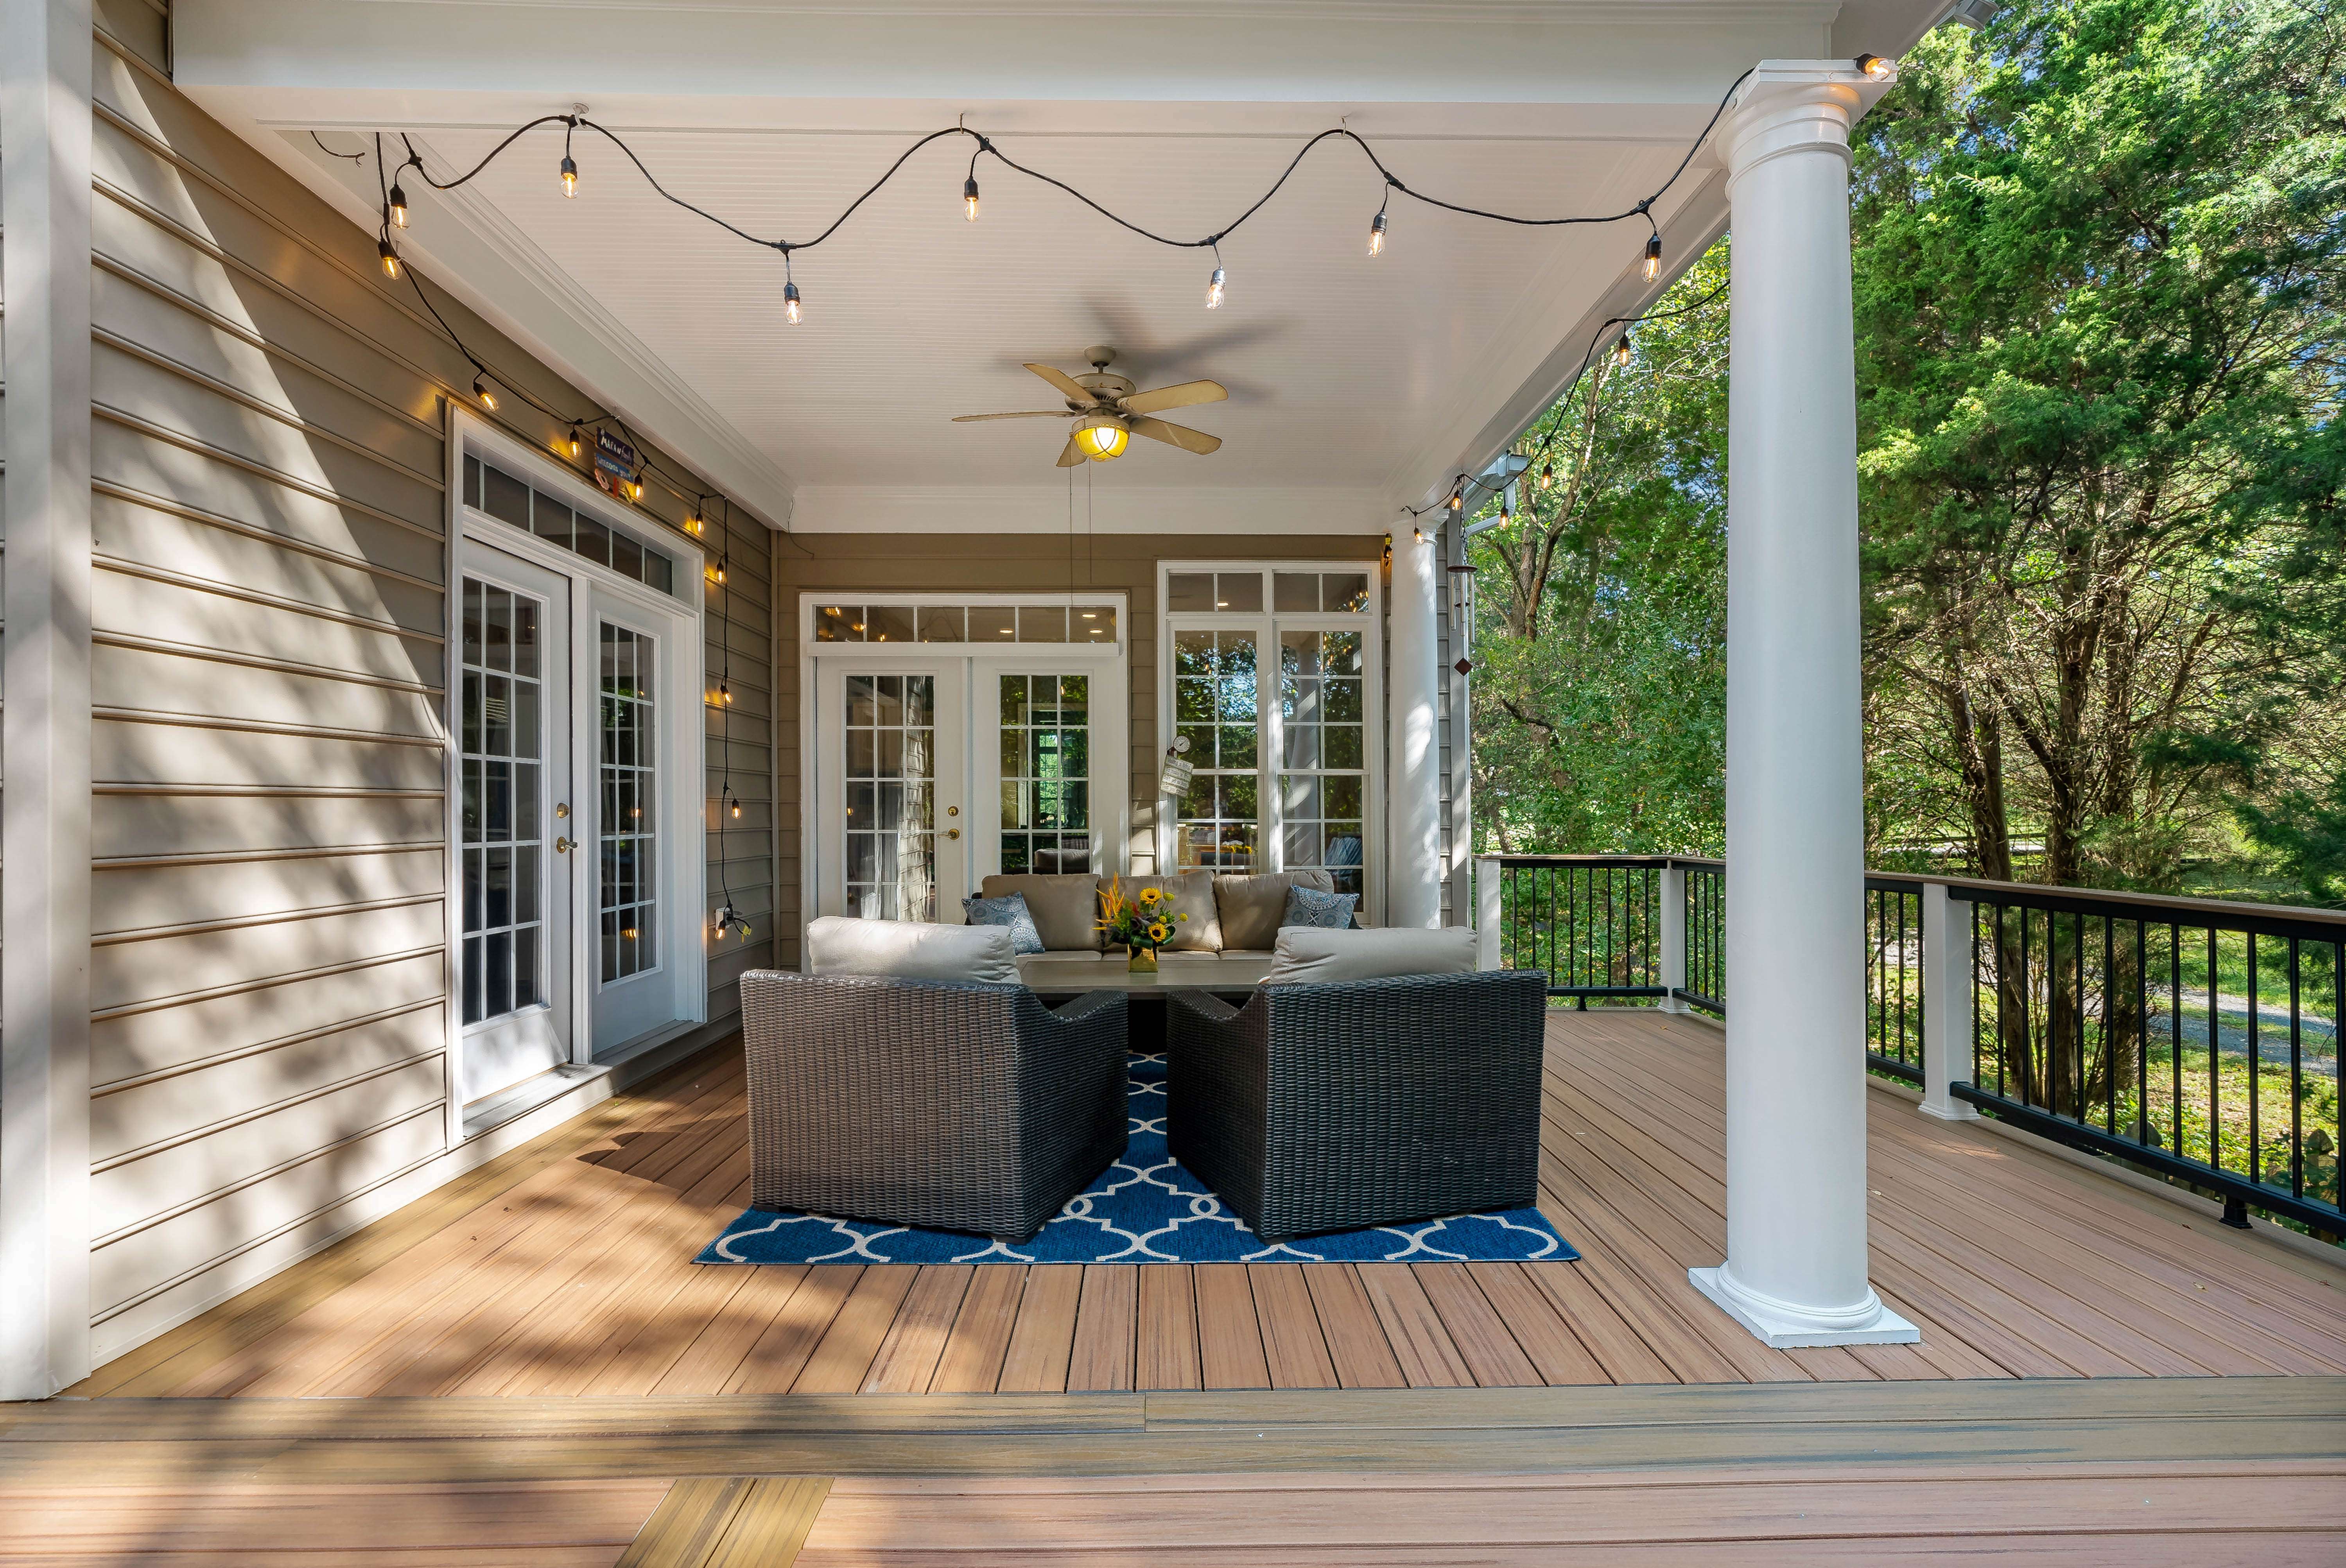 Beautiful New Deck Provides Ample Outdoor Living Space for Chantilly Family